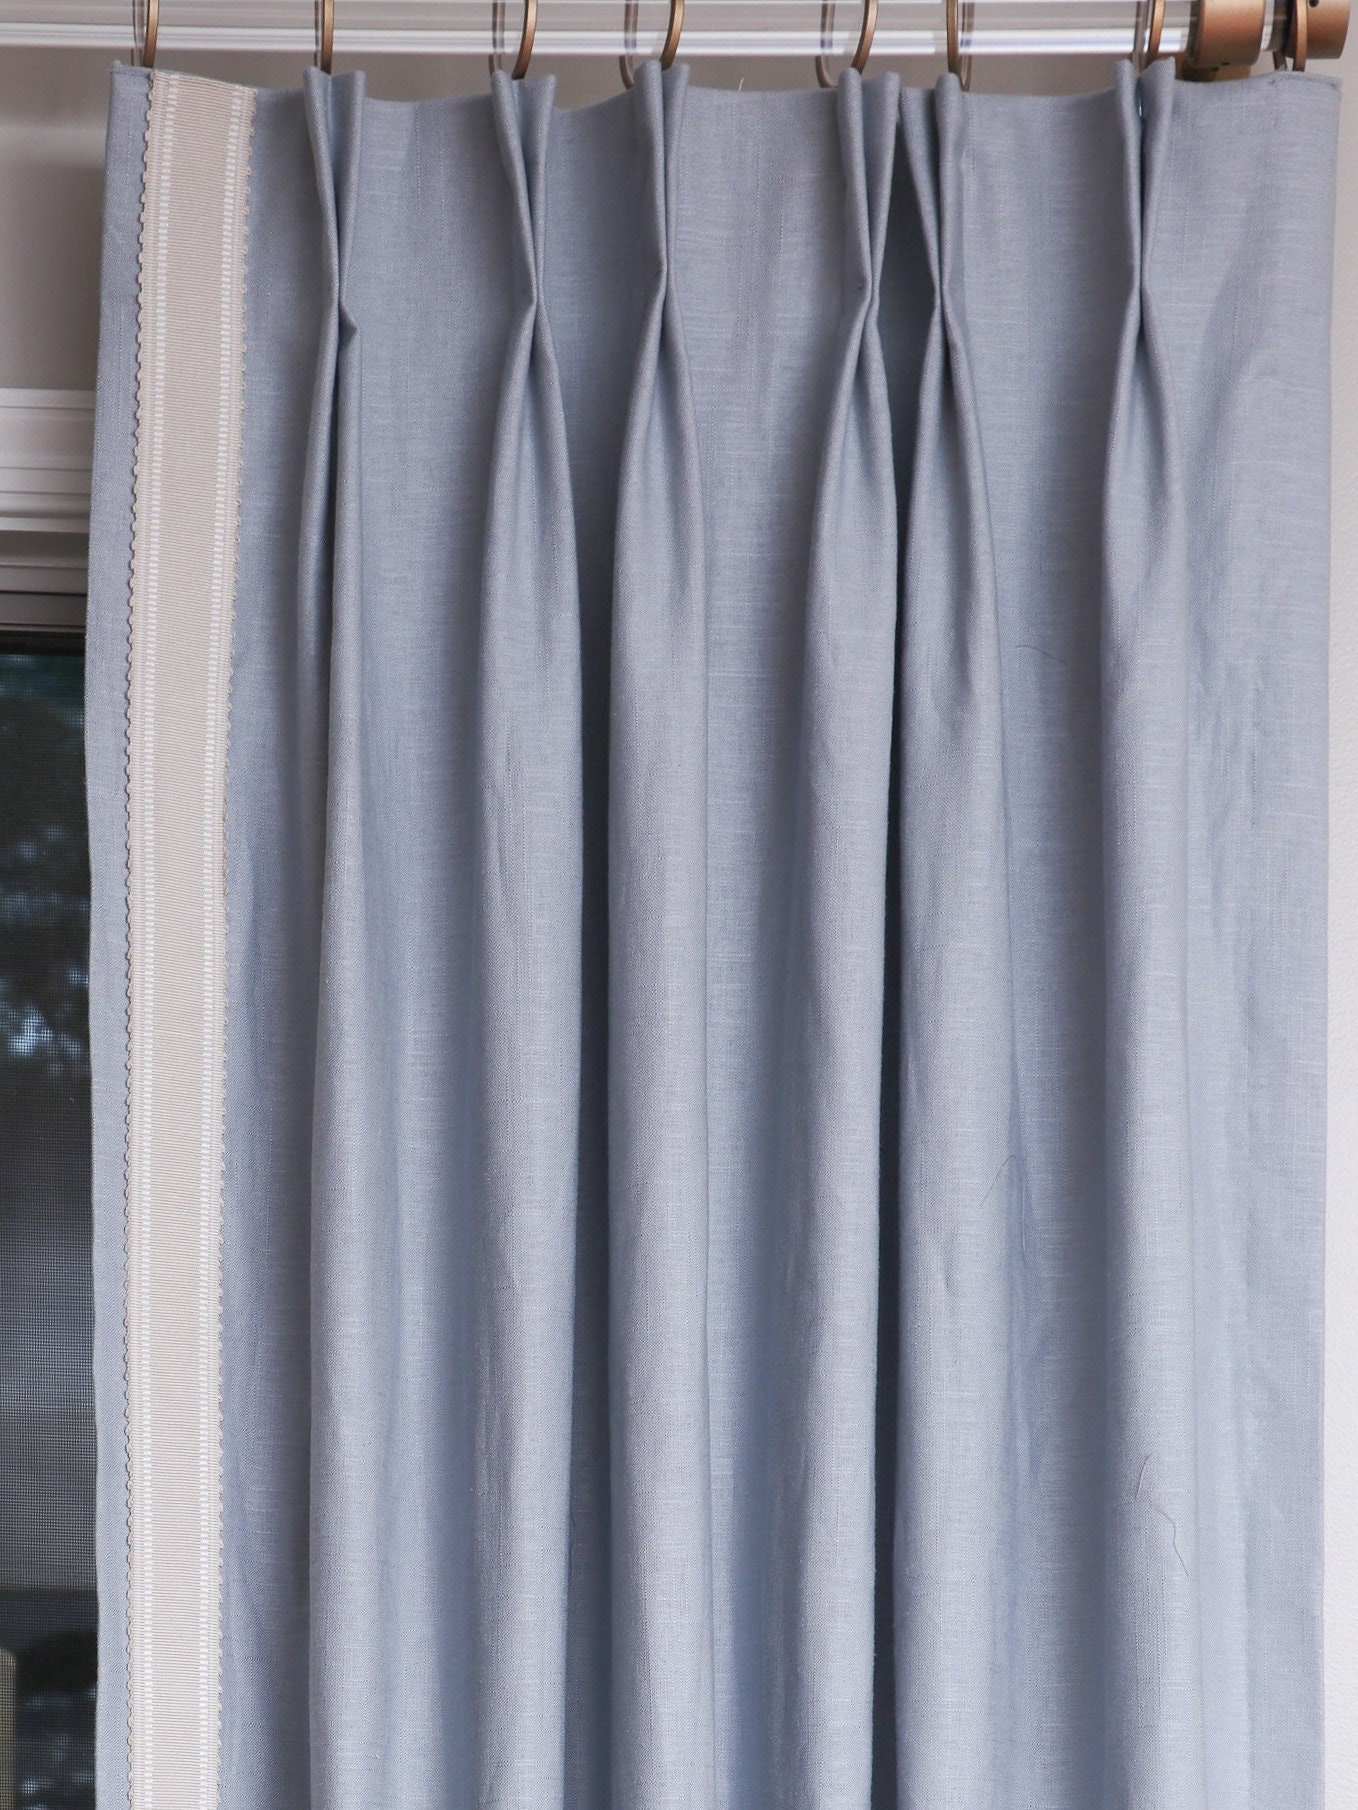 Solid Trim With Stripes in munich on Linen Drapes - Etsy